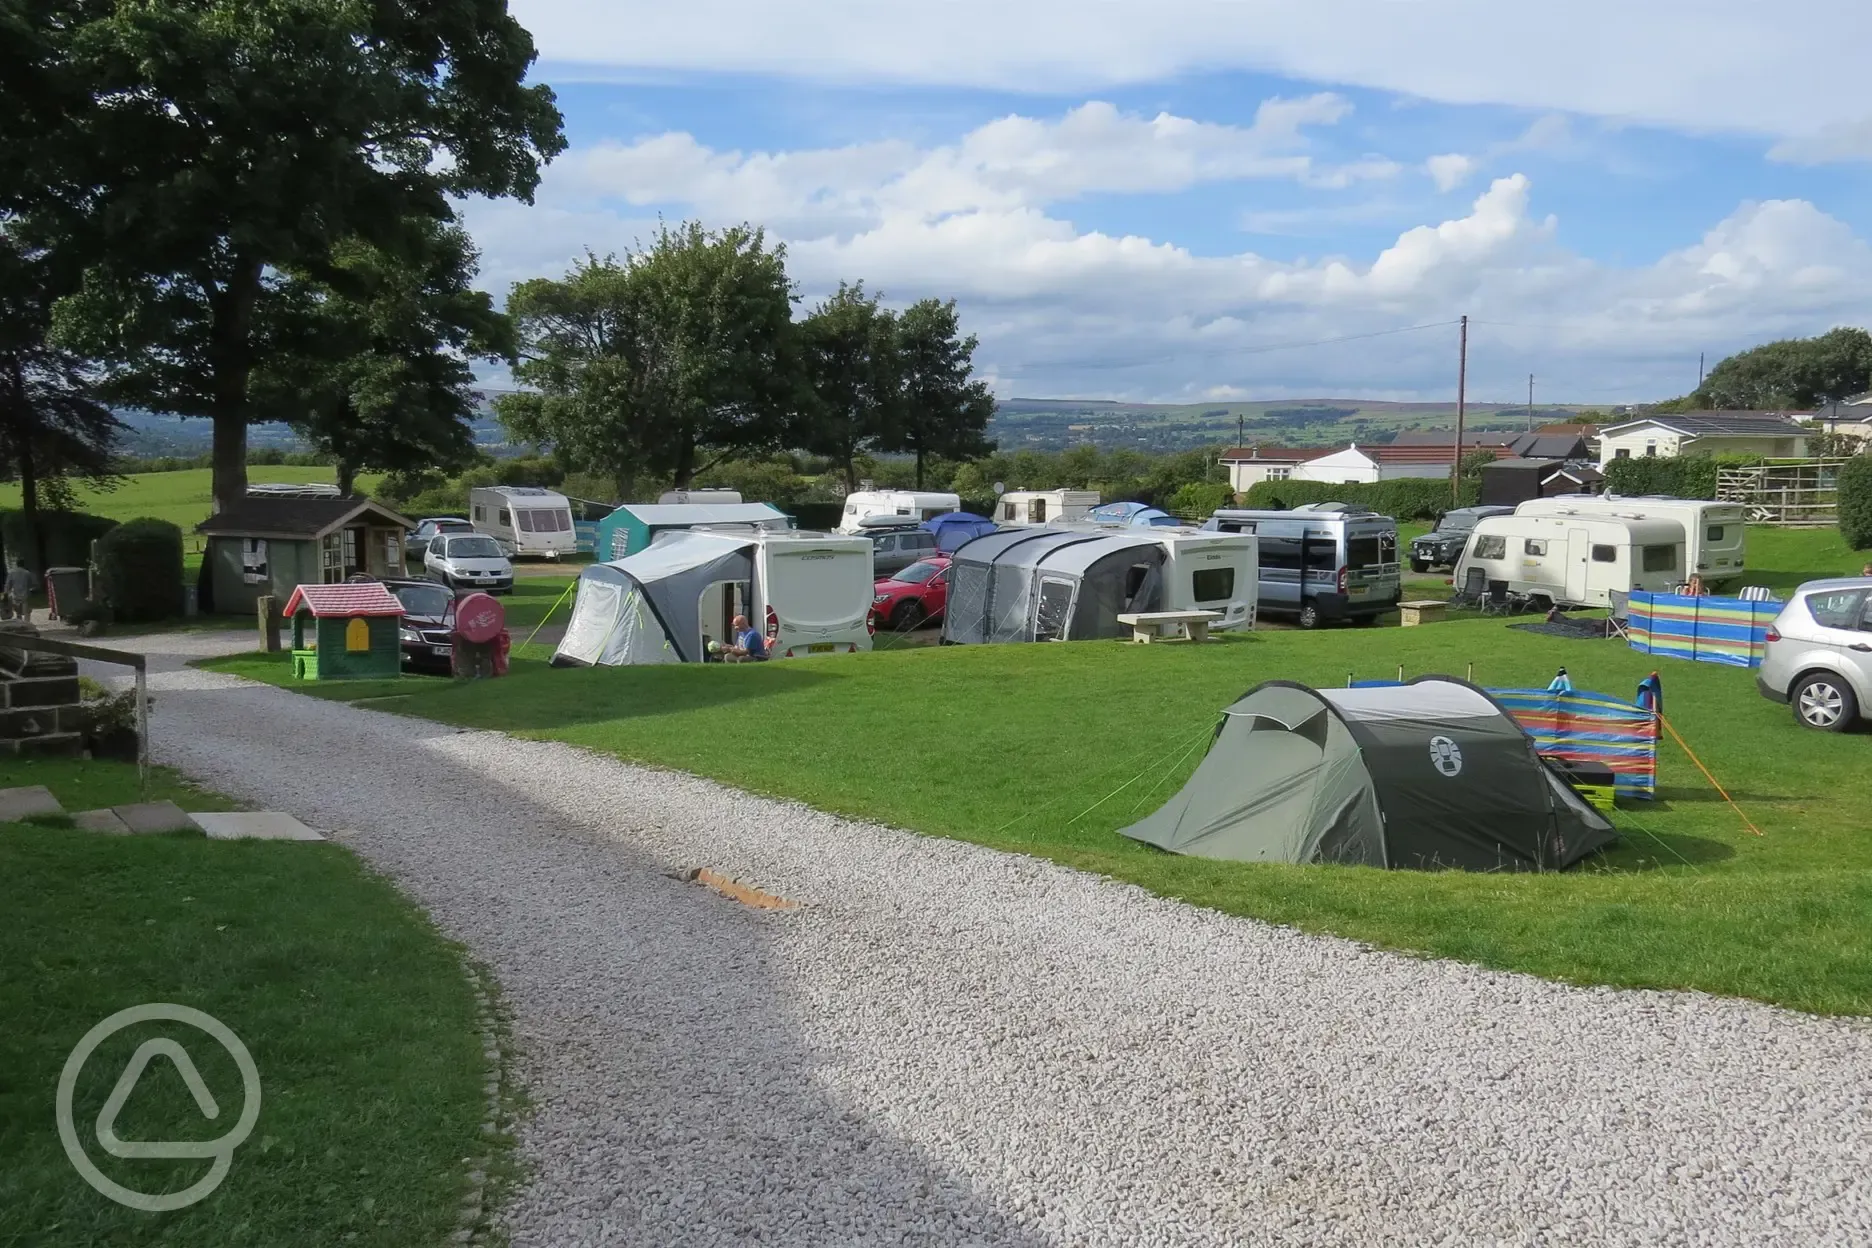 View from the campsite towards Ilkley